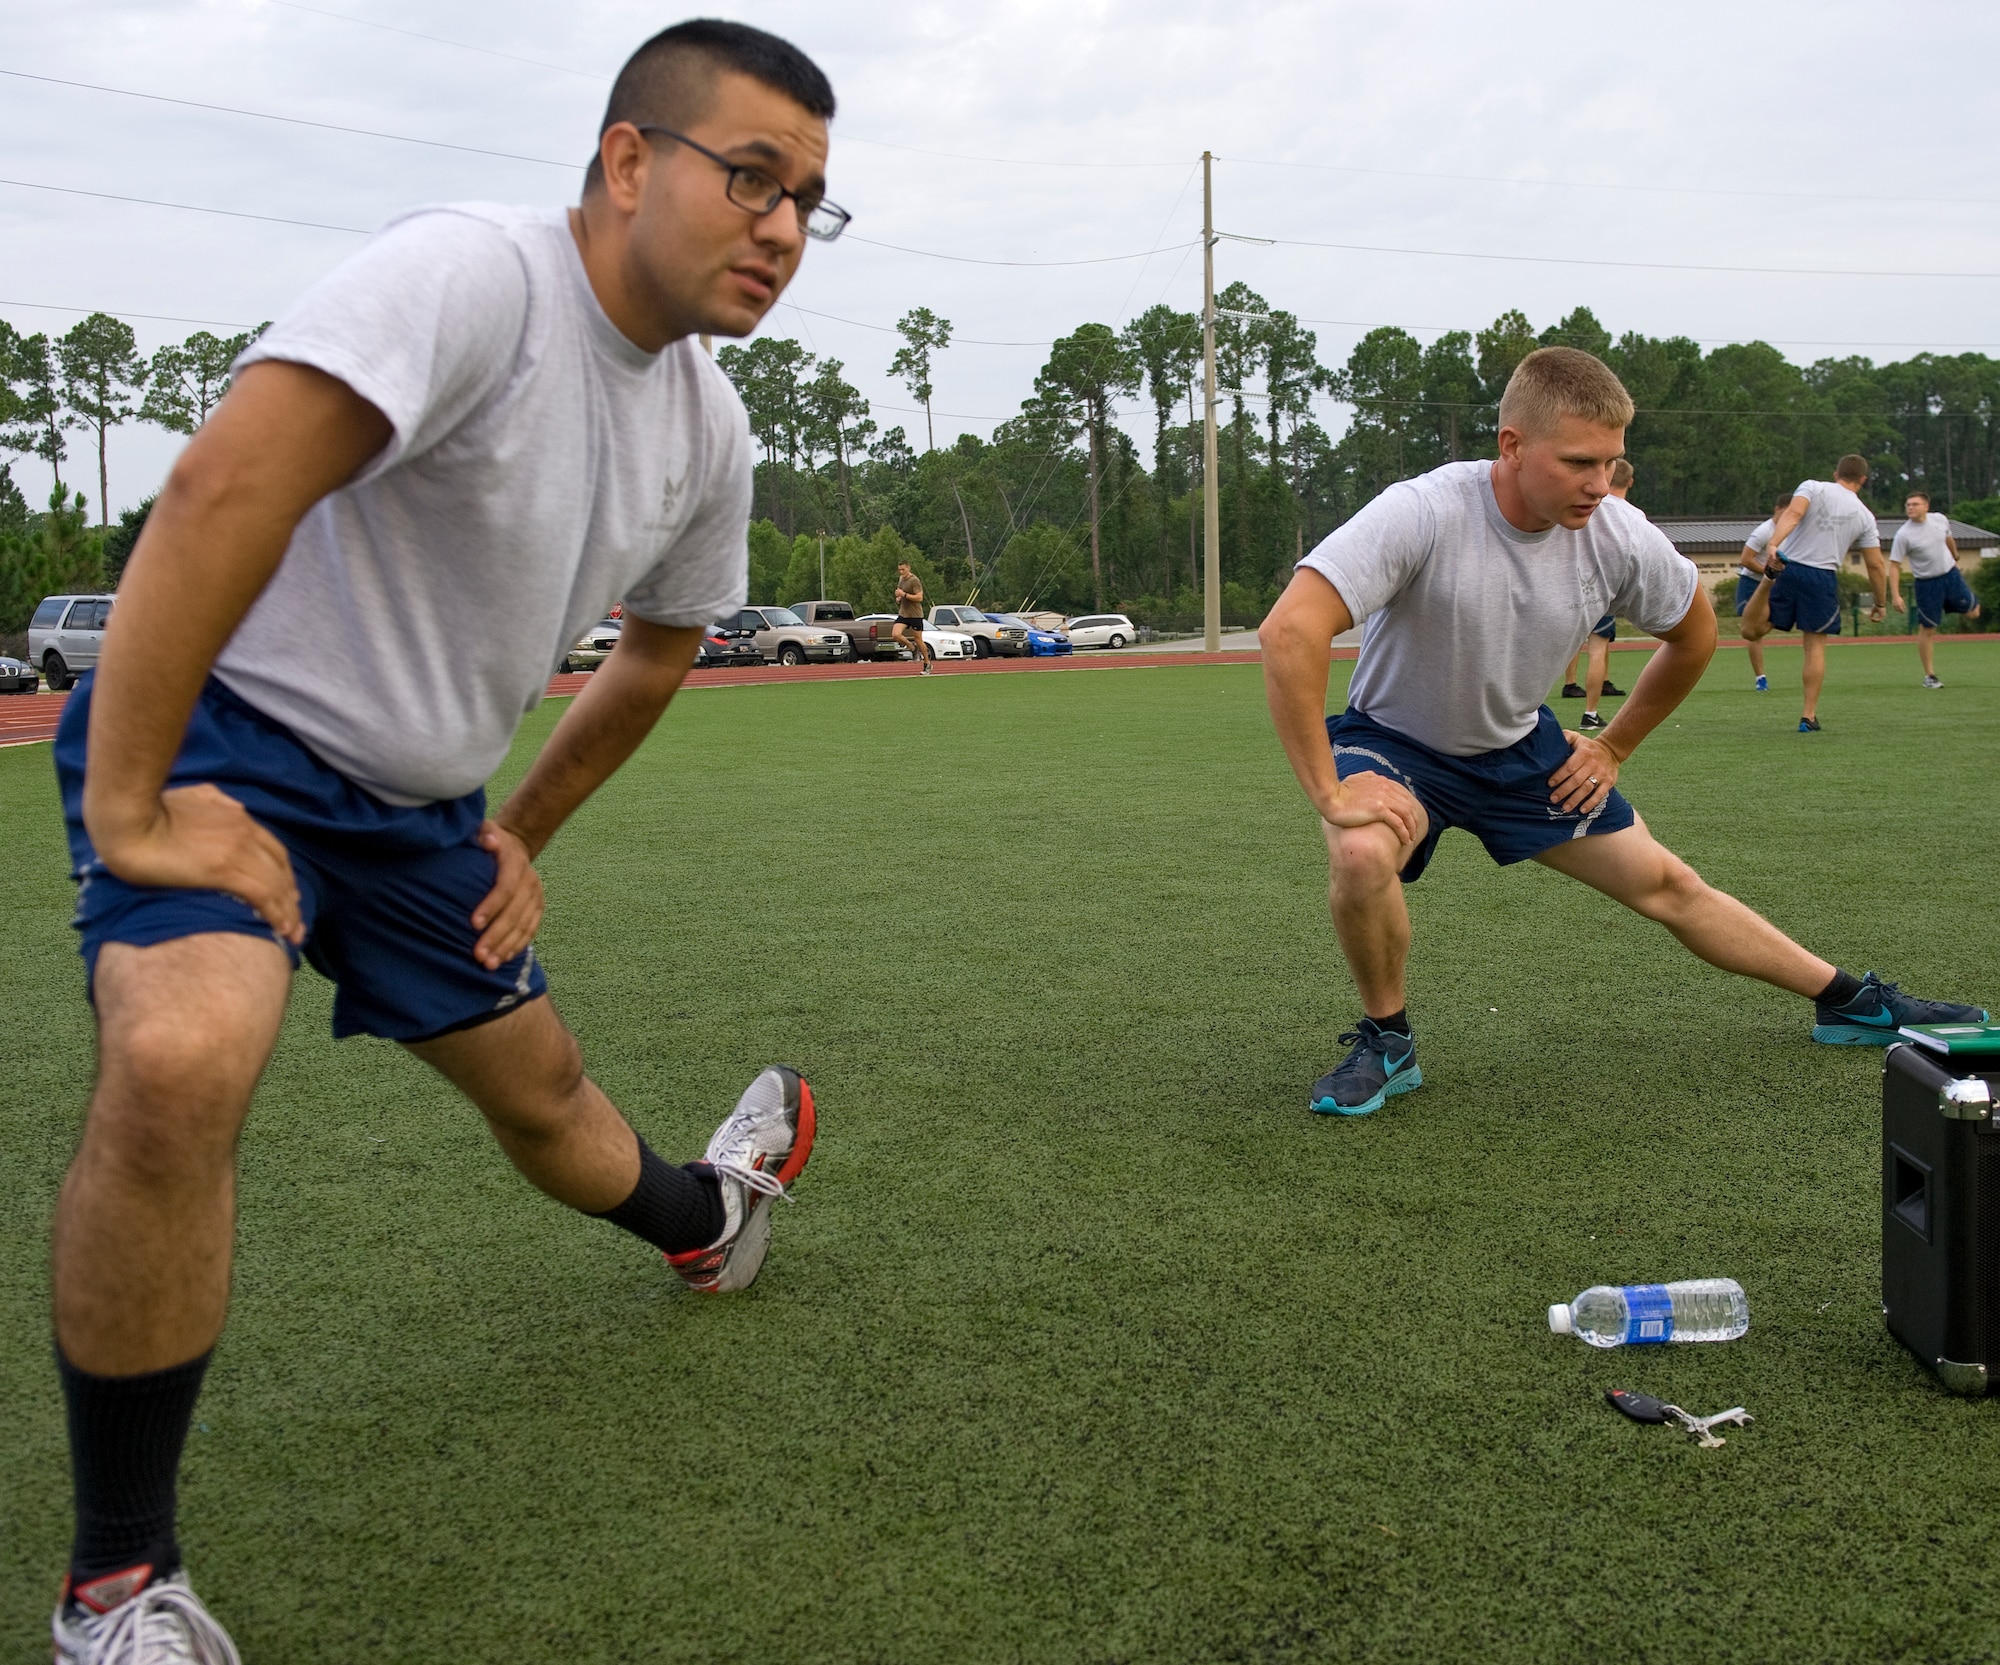 Airman 1st Class Joseph Olachea, left, 1st Special Operations Civil Engineer Squadron operations manager and Senior Airman Adam Baker, 1st SOCES water and fuels systems maintainer, stretch before beginning their physical fitness training on Hurlburt Field, Fla., July 18, 2014. Some common injuries involve the legs, which include hamstring and ankle sprains, knee injuries and overuse injuries such as runner’s knee and plantar fasciitis (U.S. Air Force photo/Senior Airman Kentavist P. Brackin)